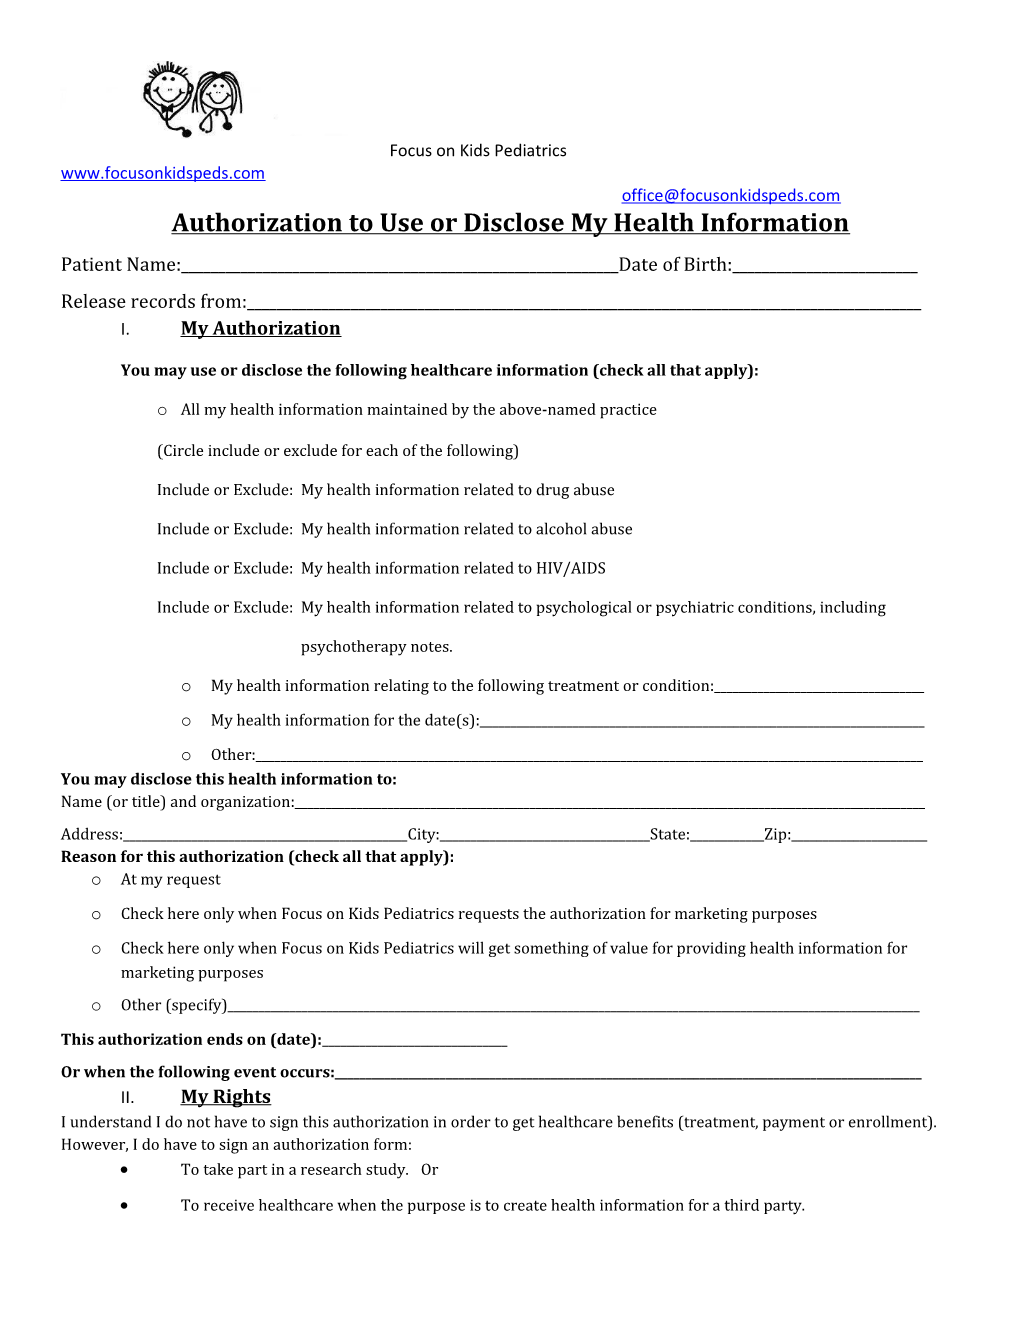 Authorization to Use Or Disclose My Health Information